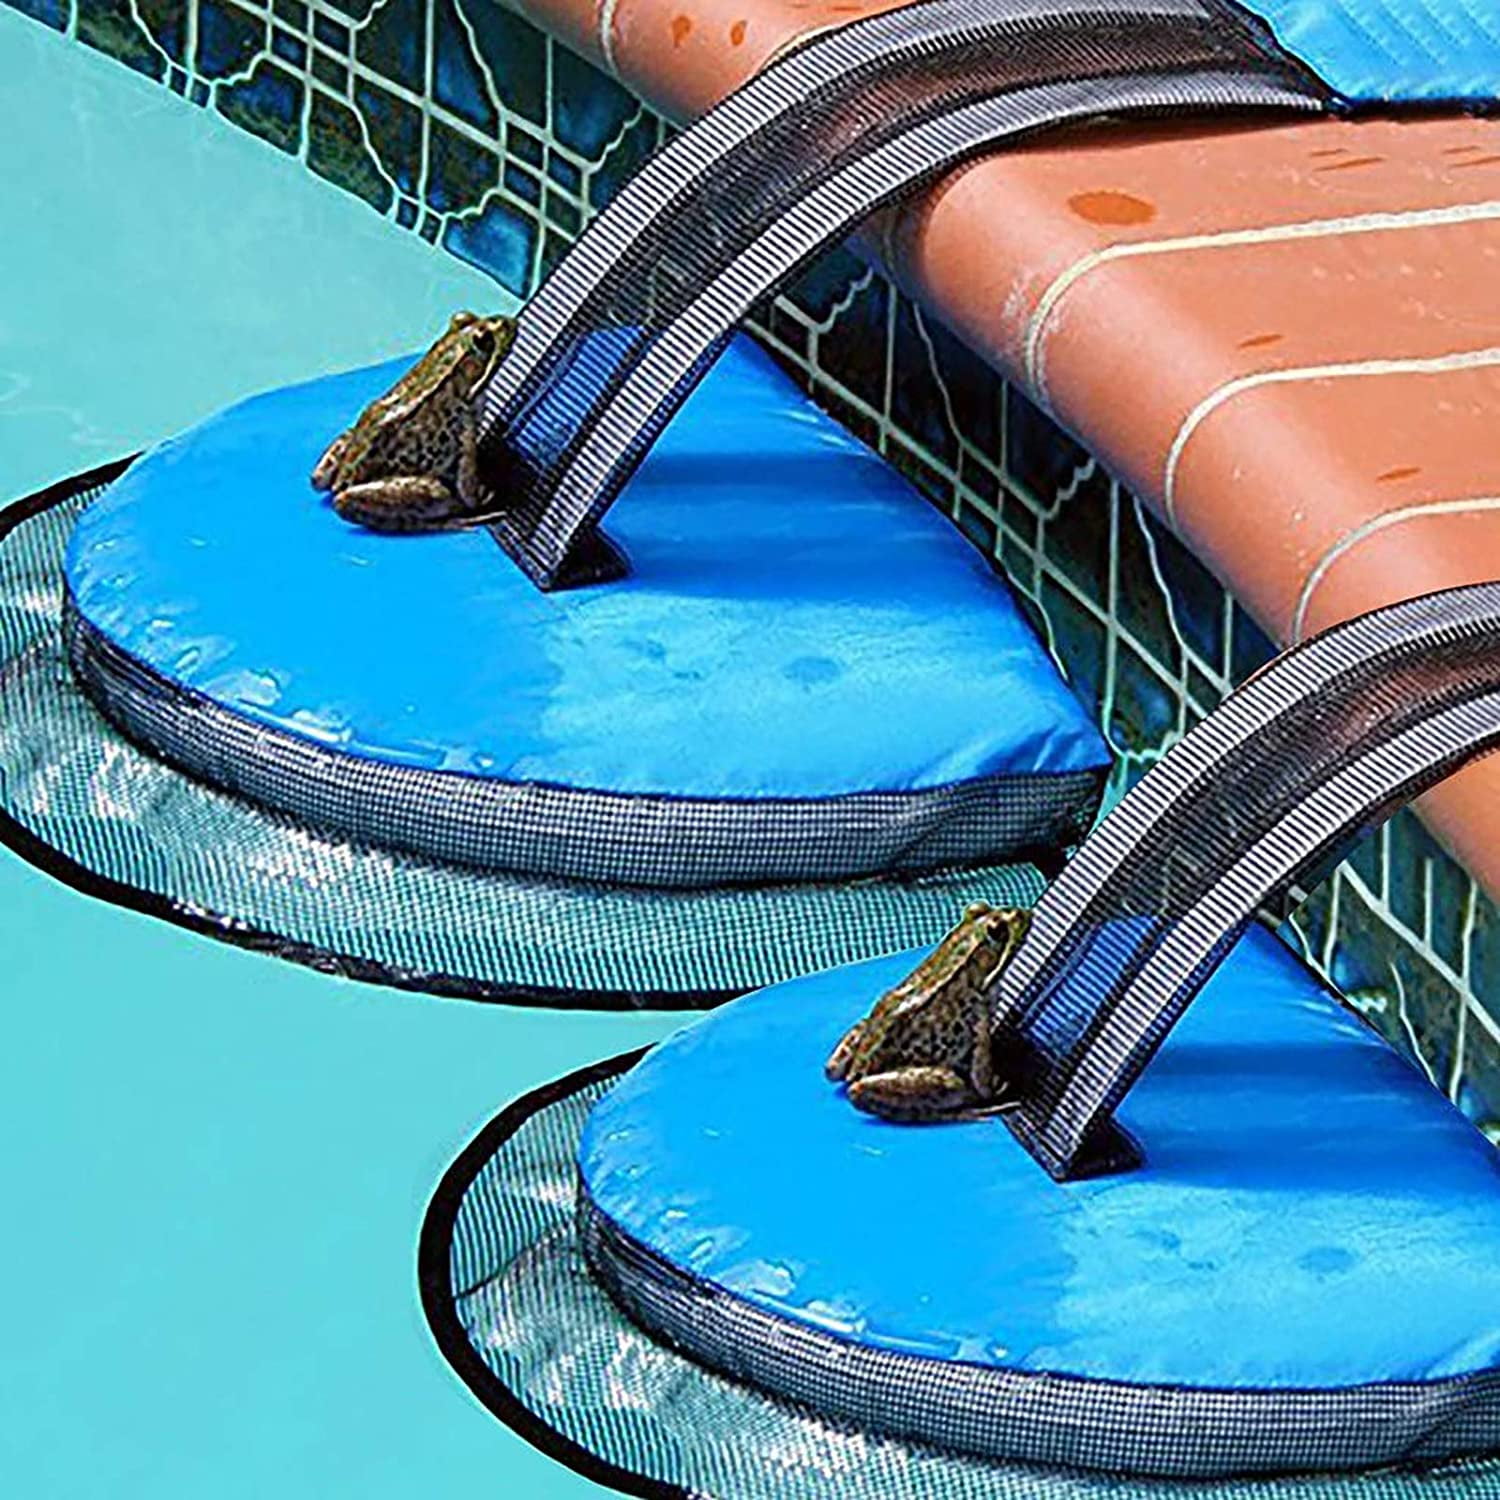 ZMHS 2 Pack Animal Saving Escape Ramp for Pool Toads Animal Mice Pool Animal Saver Birds Frogs Floating Ramp Rescues Blue Saving Critters Frog Log Pad Pool & Spa Accessories & Tools 